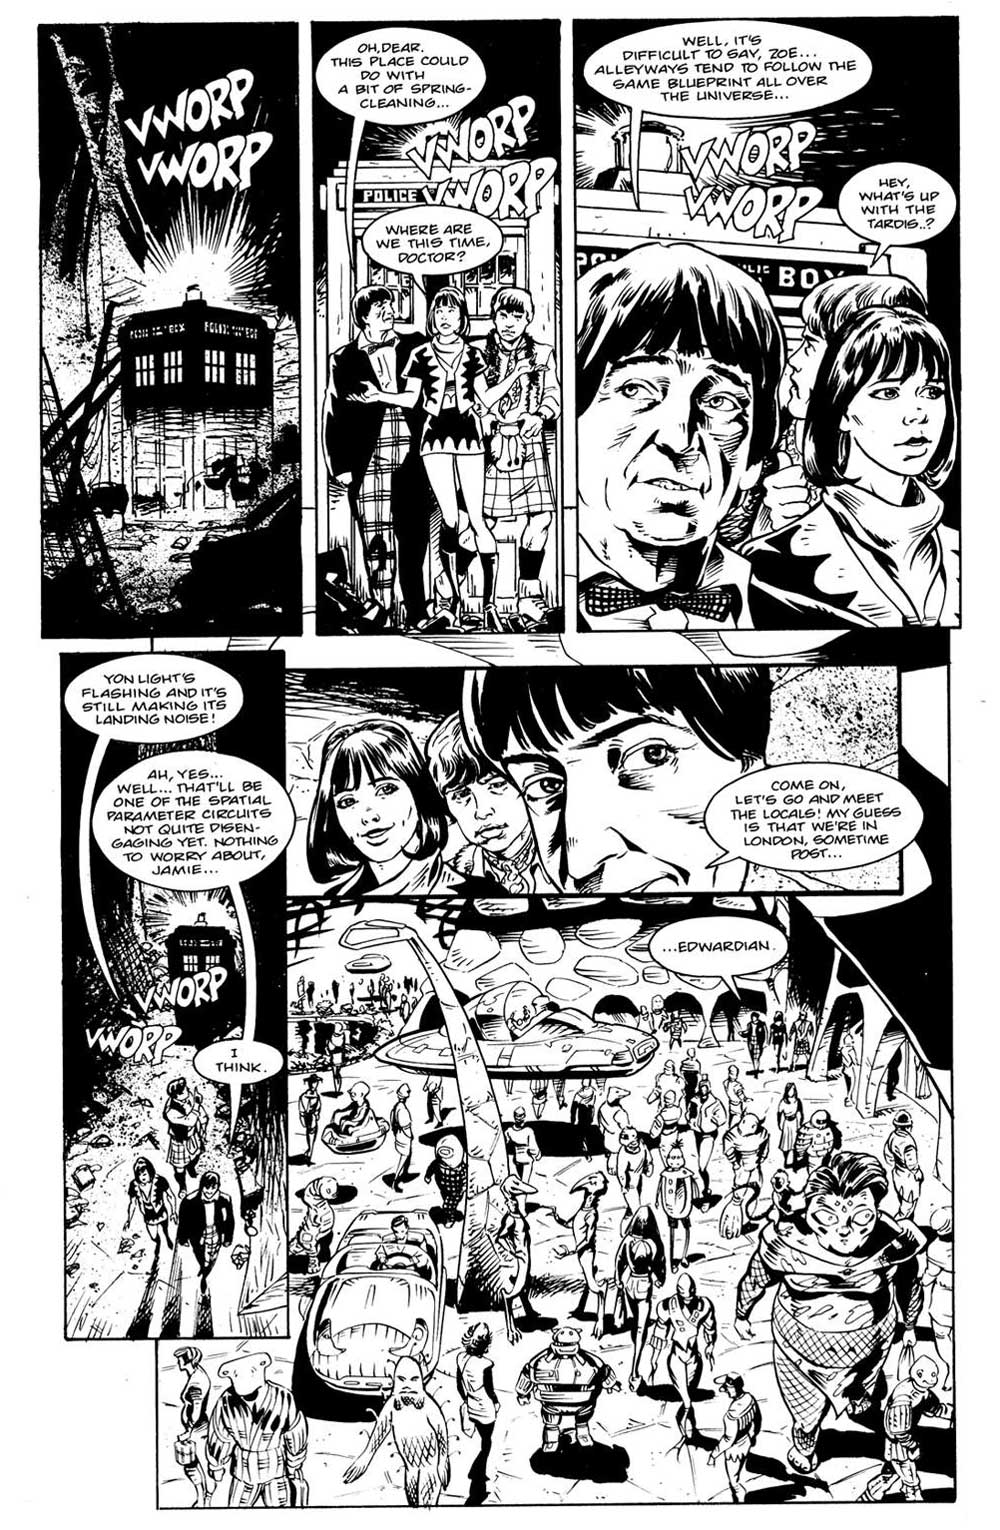 "Land of the Blind", a Second Doctor story by Scott Gray, drawn by Lee Sullivan